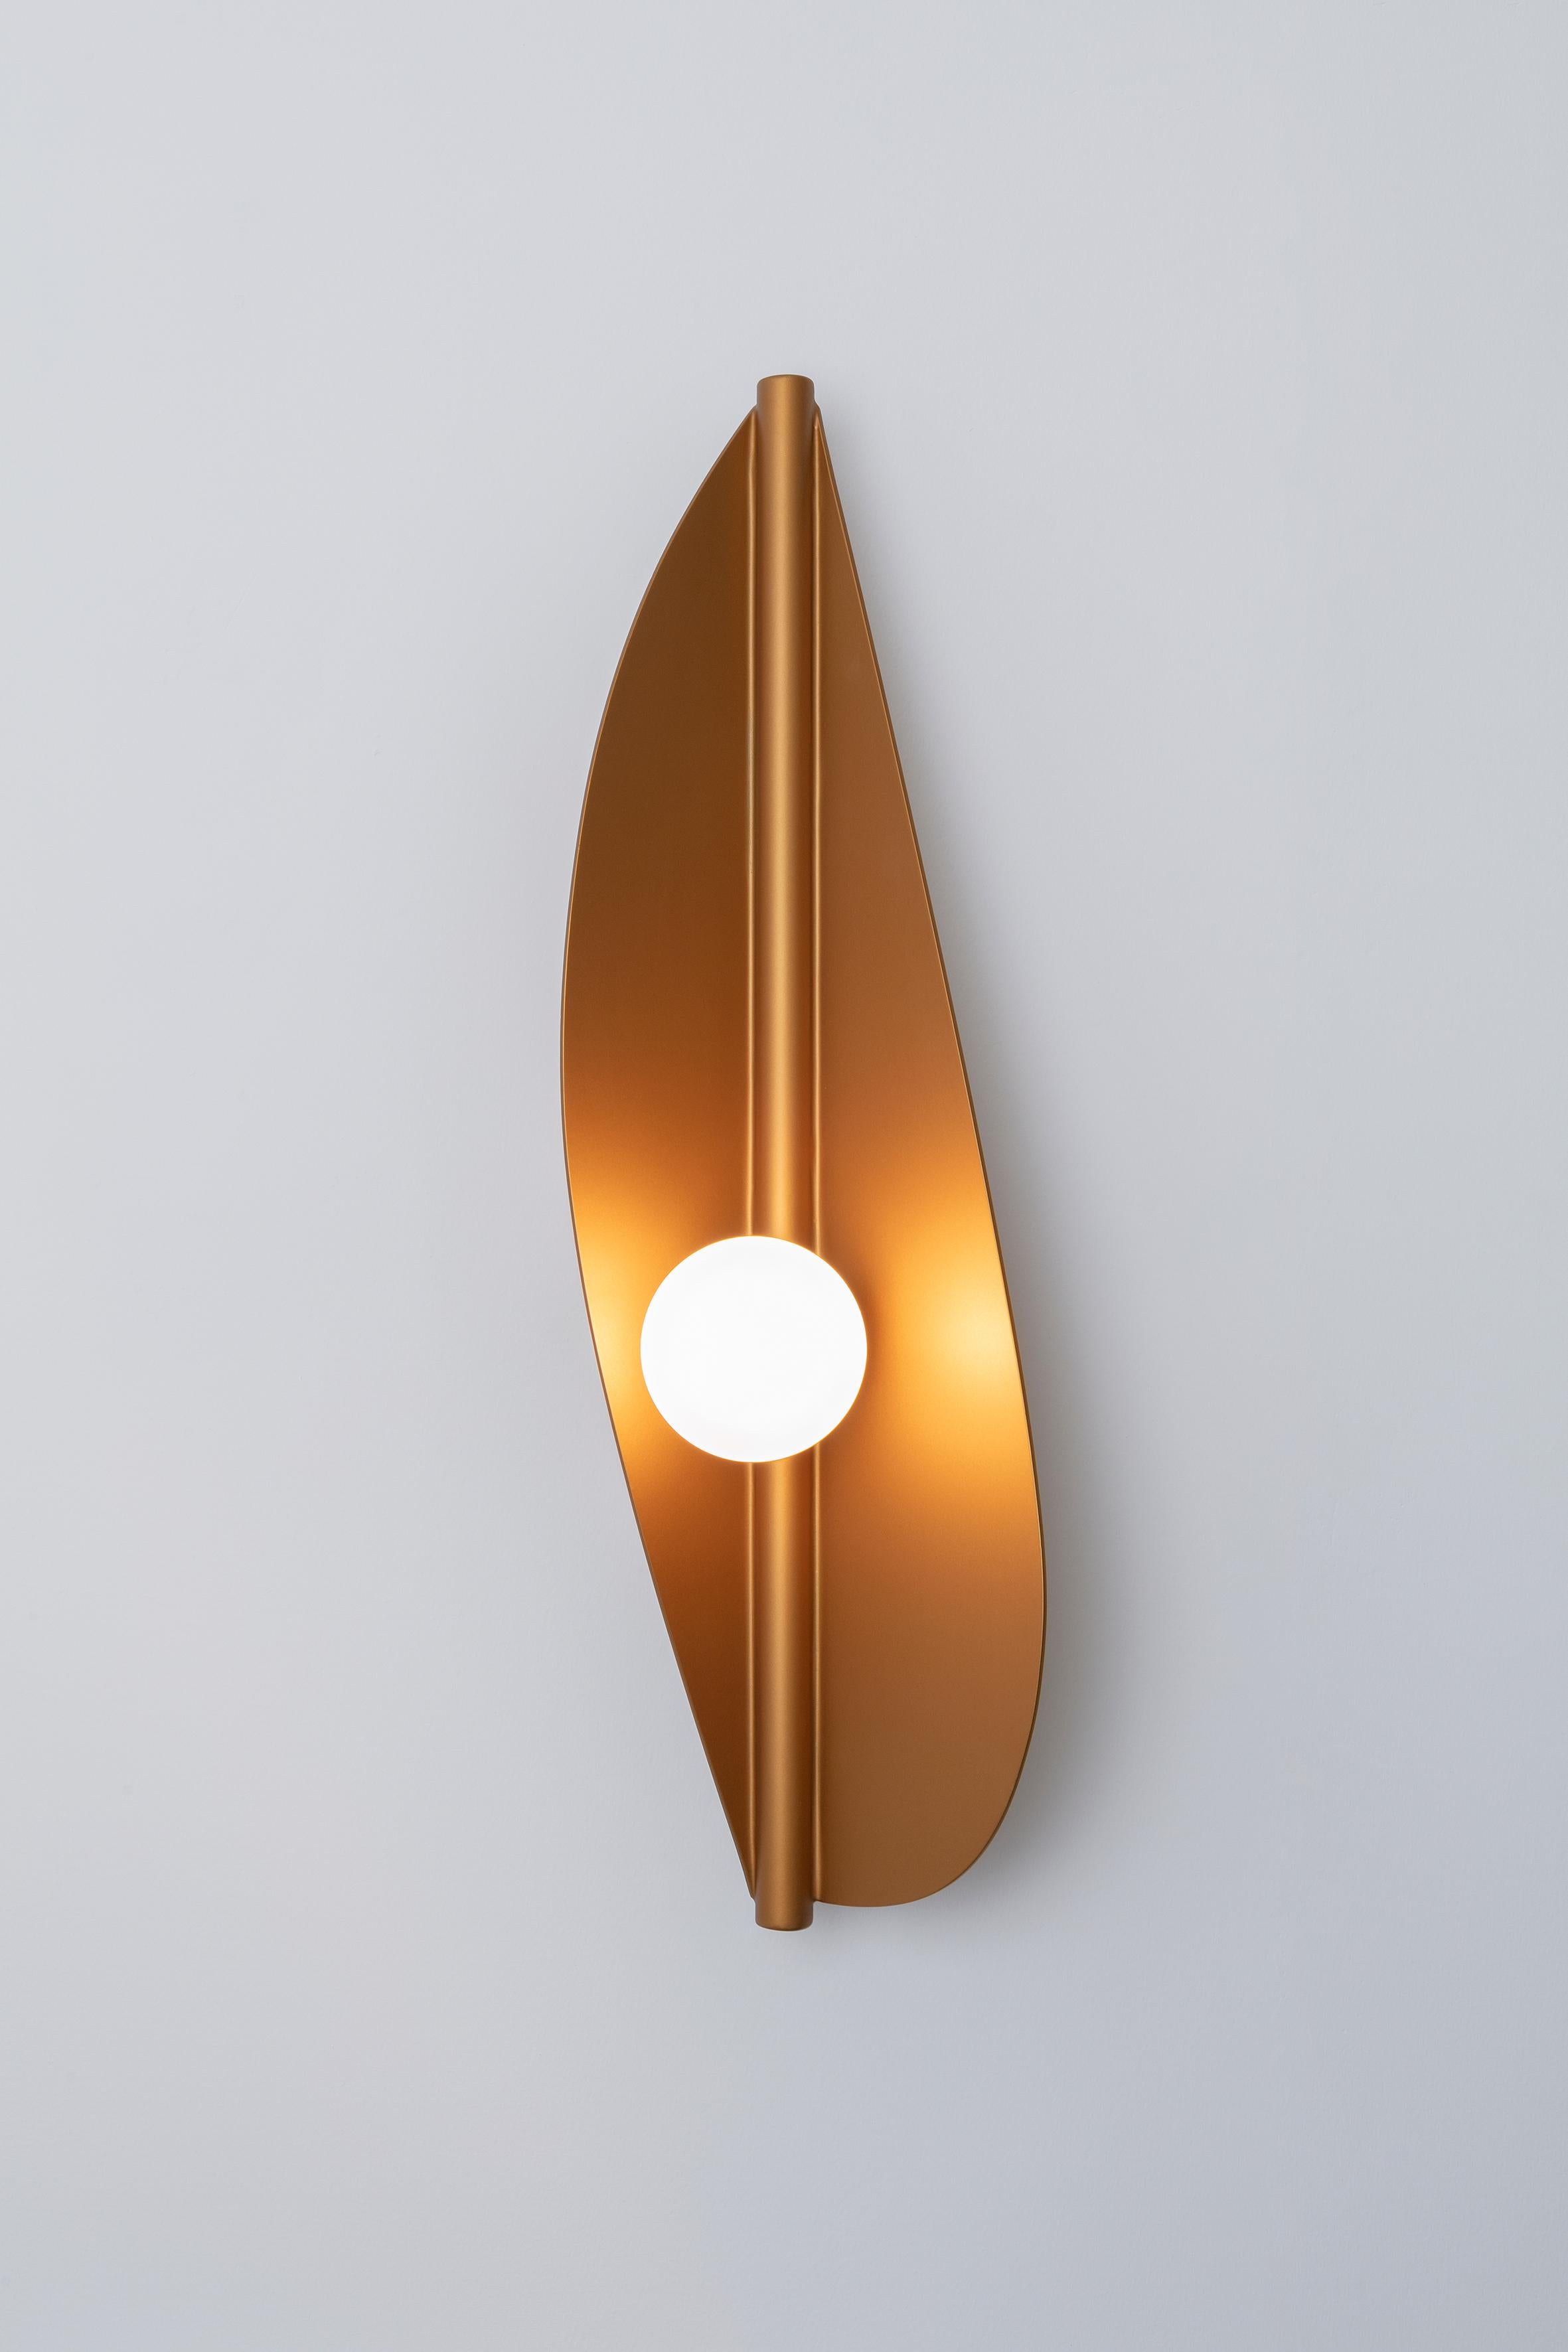 Painted Feuillage Wall Mounted Metallic Copper, Carla Baz